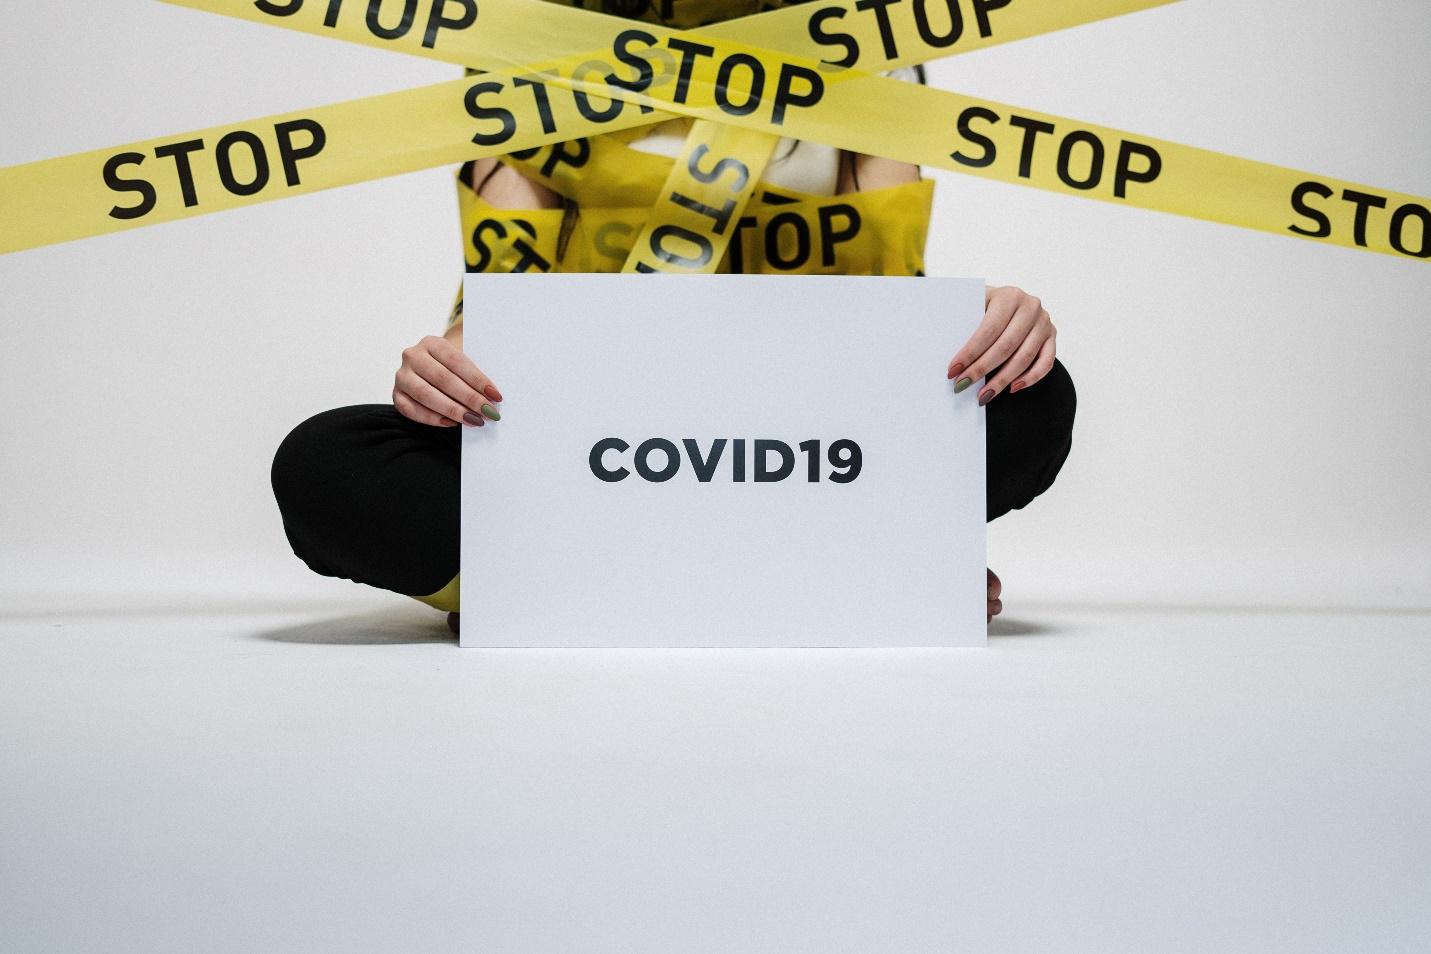 CBD & COVID-19 - How to Manage Stress, Fear & Anxiety